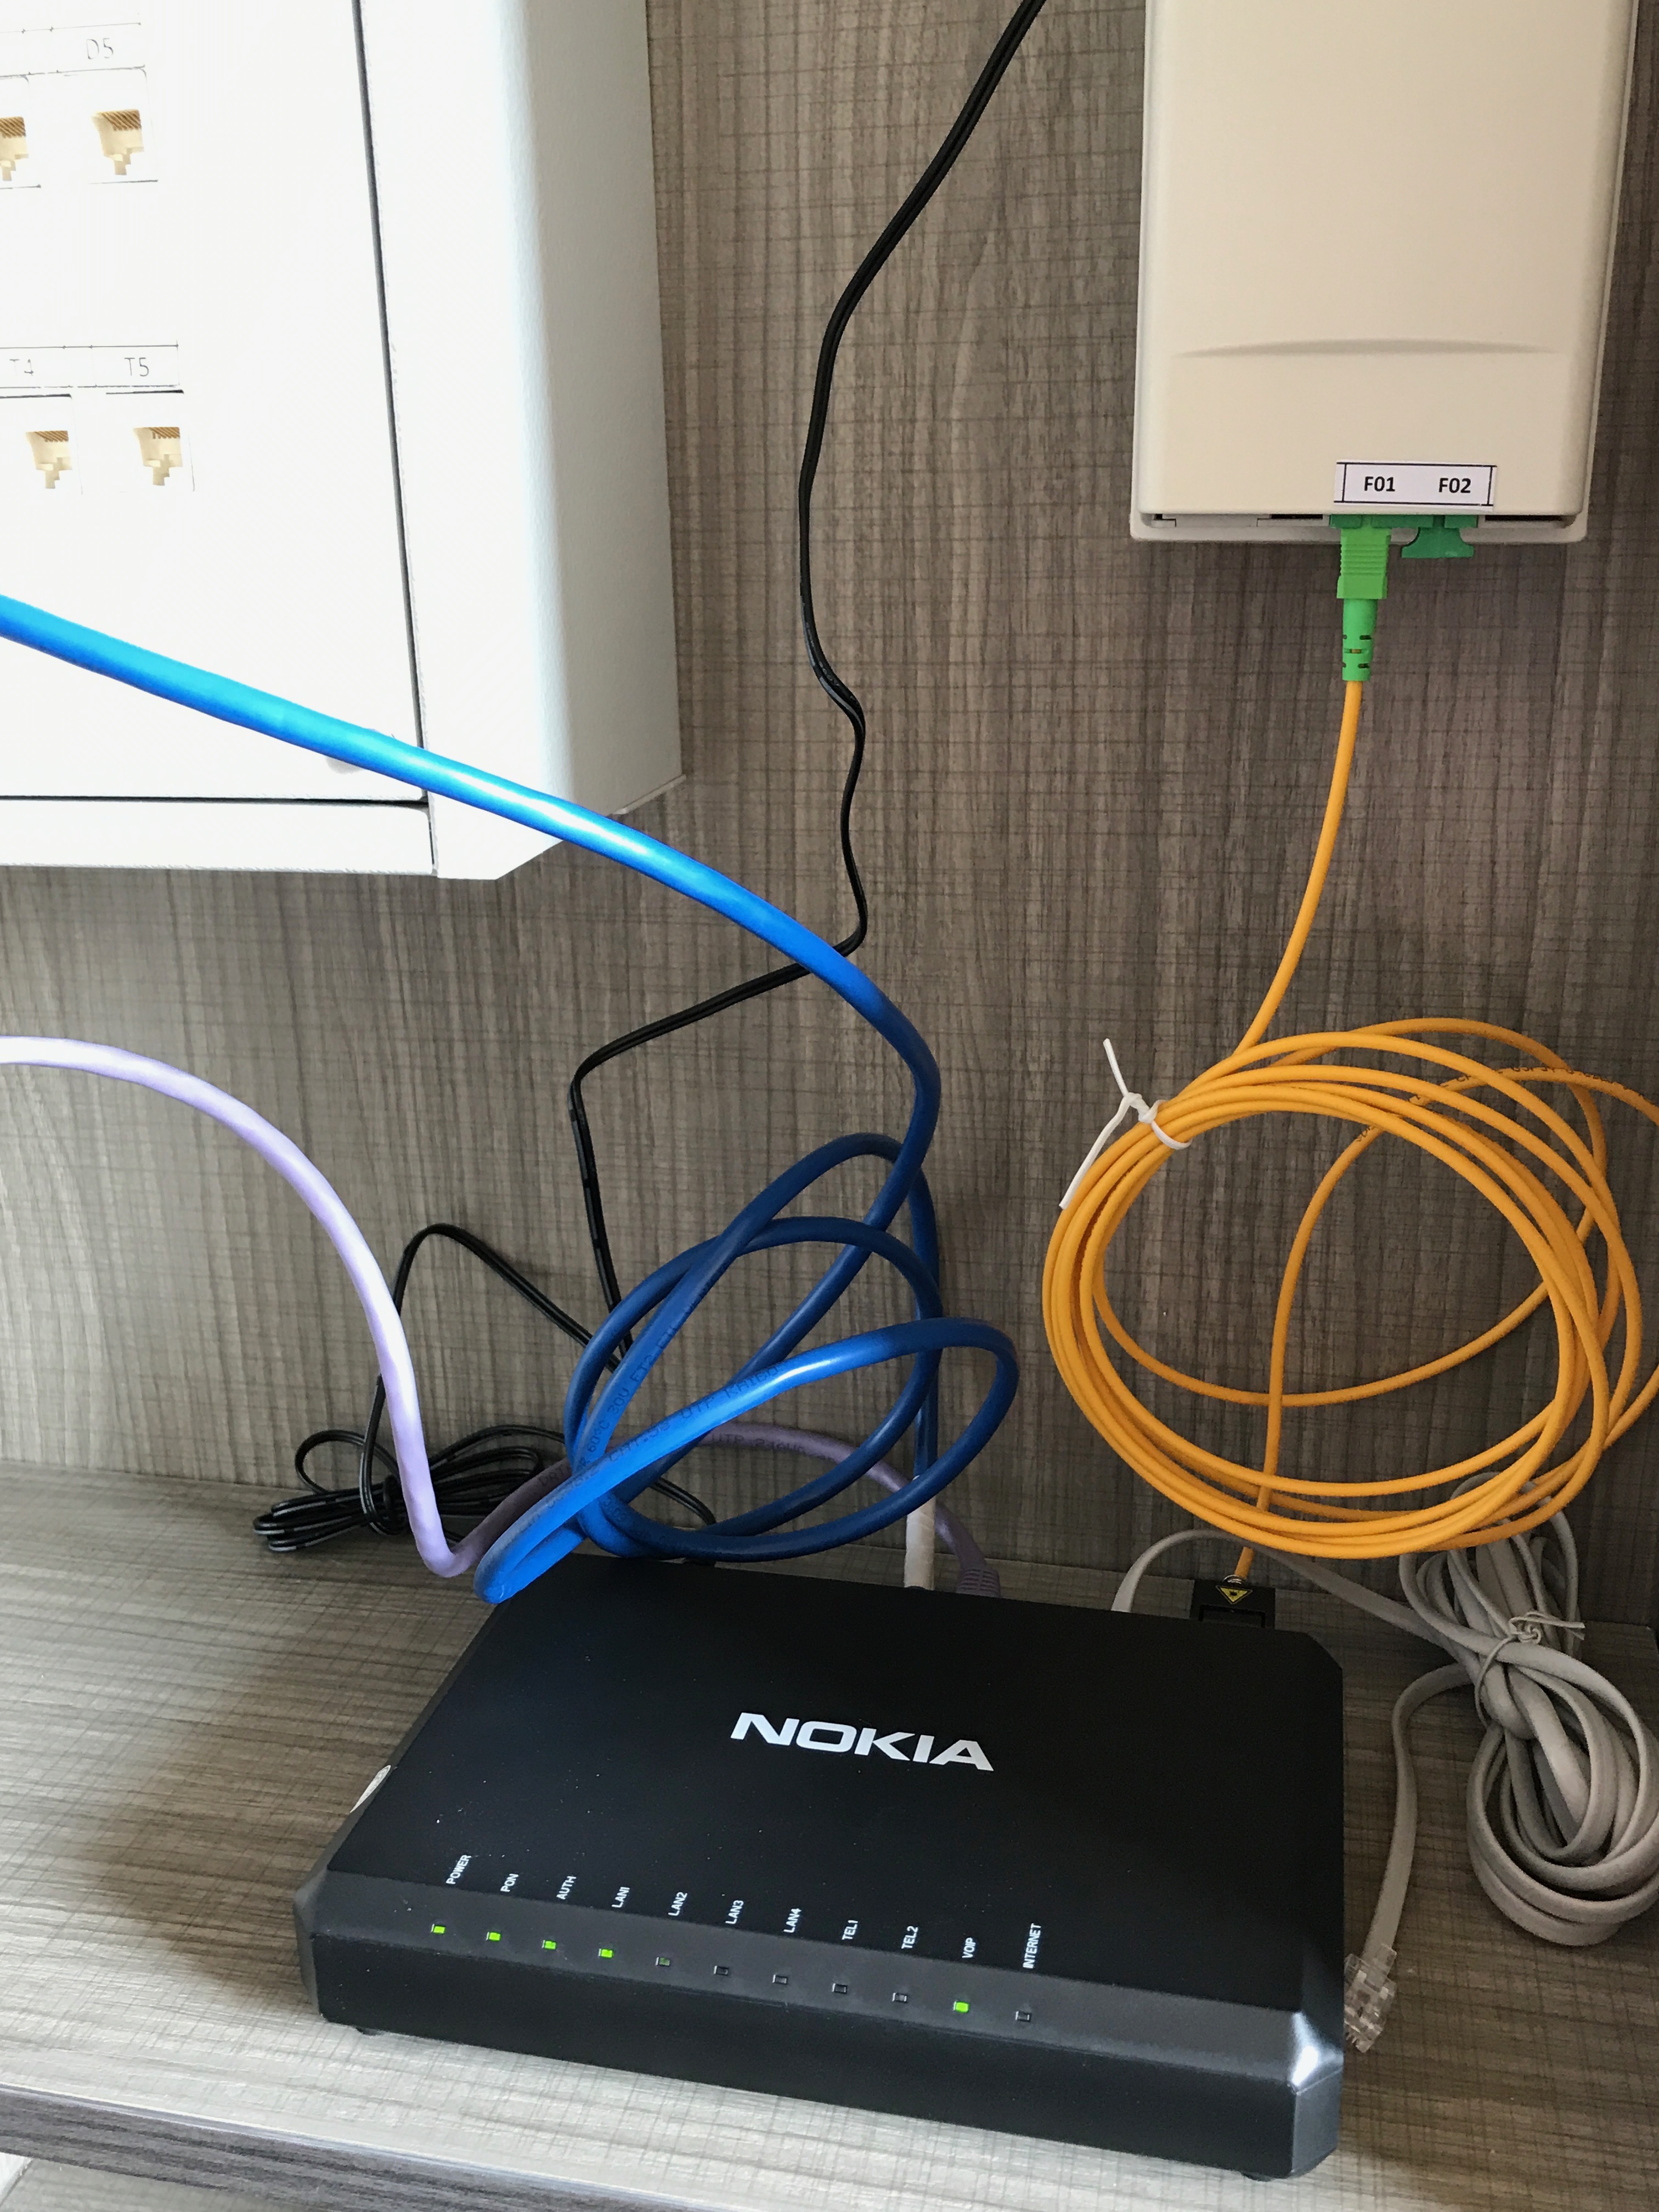 With MyRepublic, now you can have two separate high speed home broadband  networks with one subscription! | IT Review | Singapore